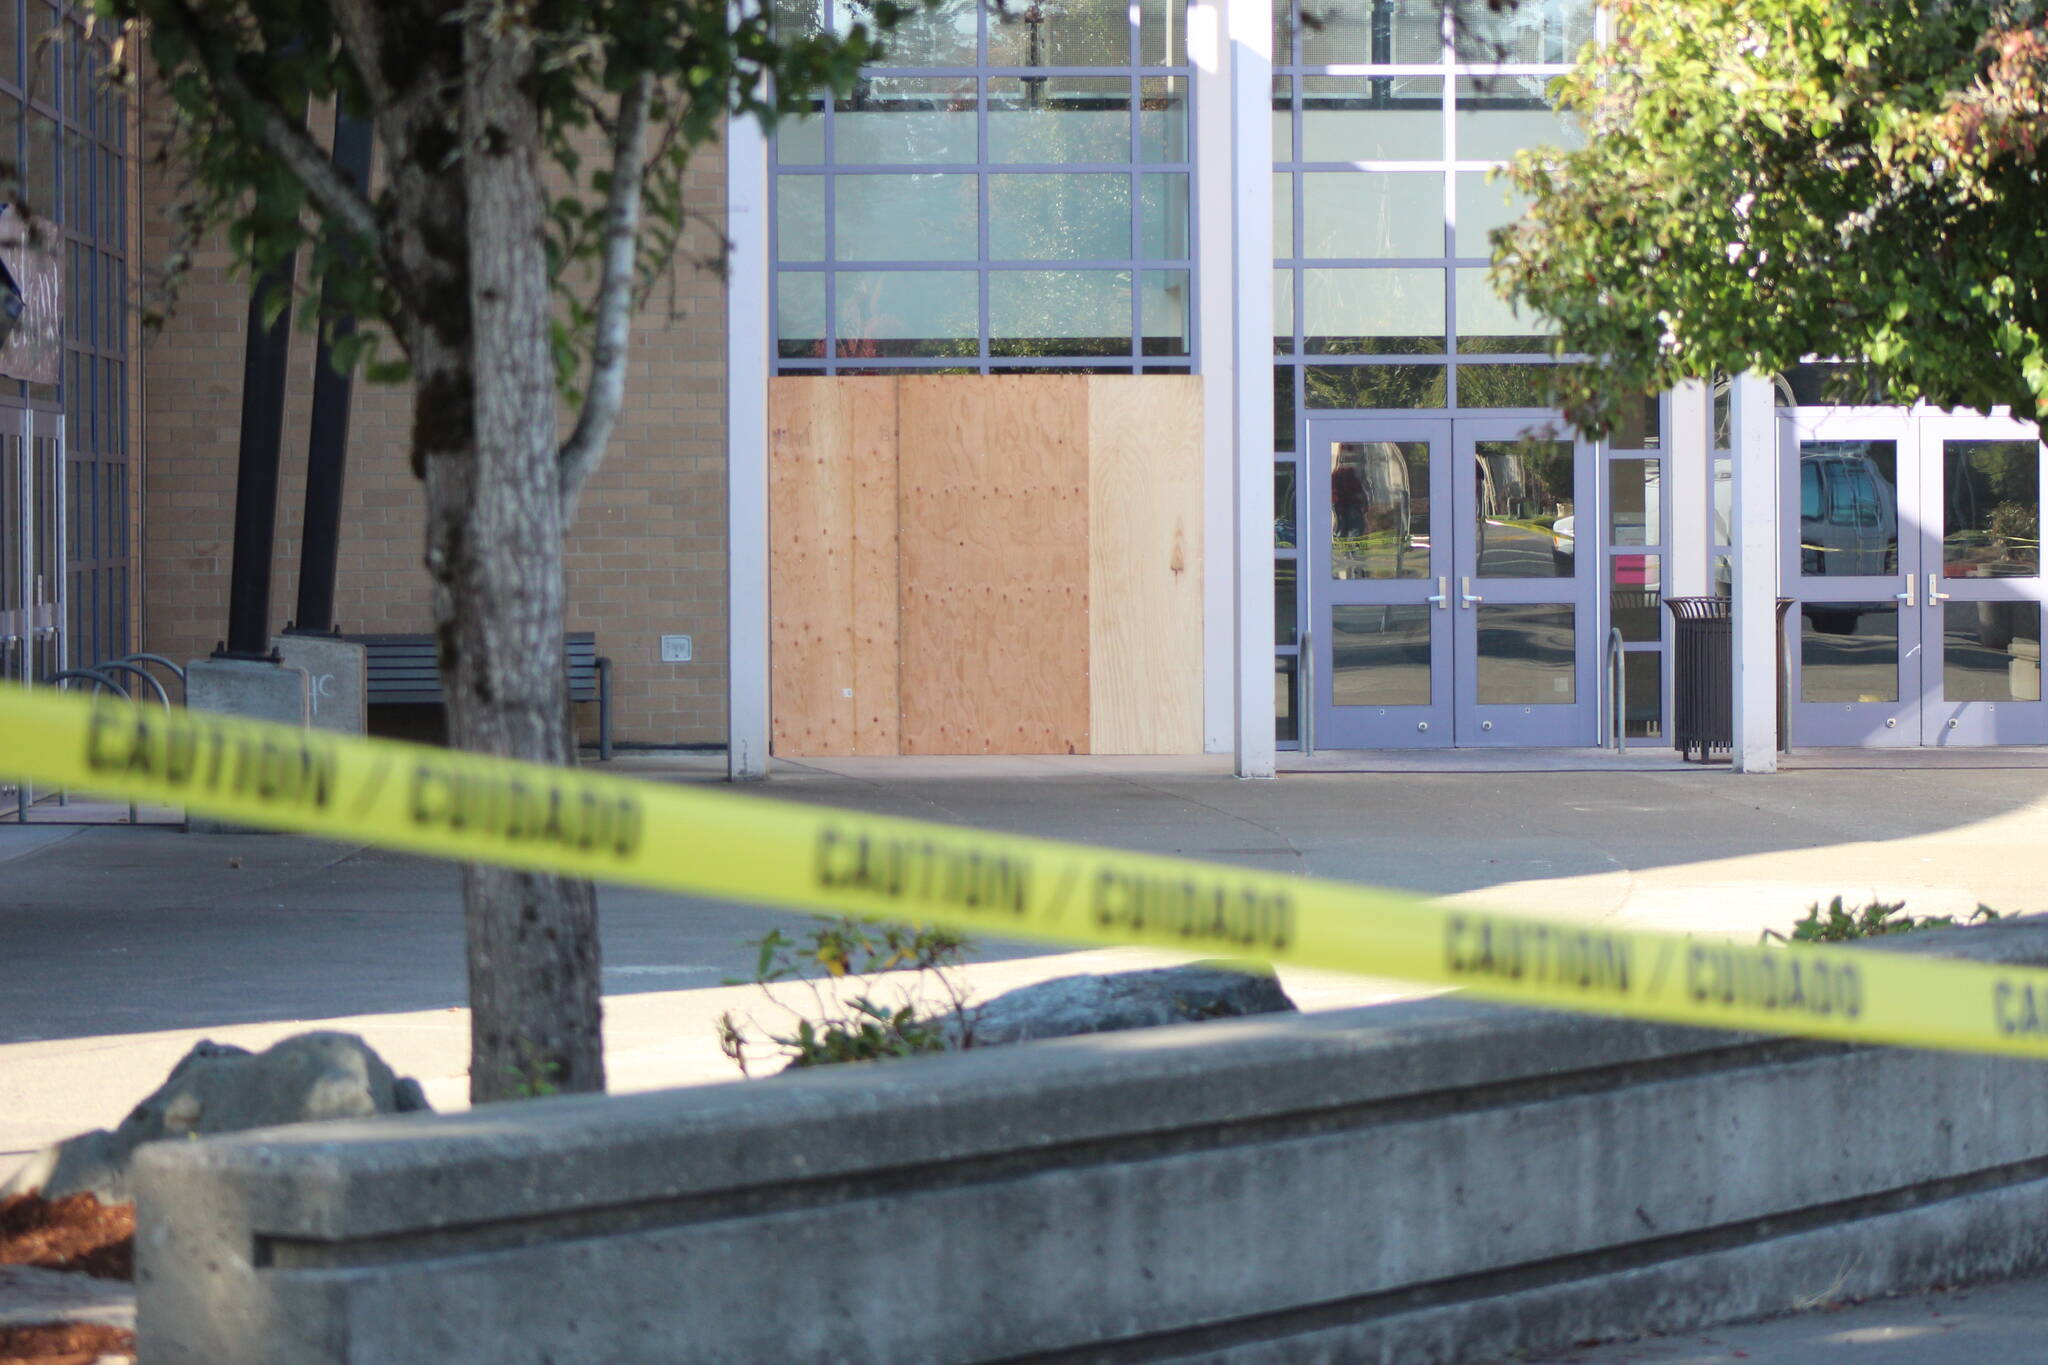 Hours after the early morning crash, plywood had covered the site of the crash and caution tape bordered the front of Hazen High School. Photo by Bailey Jo Josie/Sound Publishing.